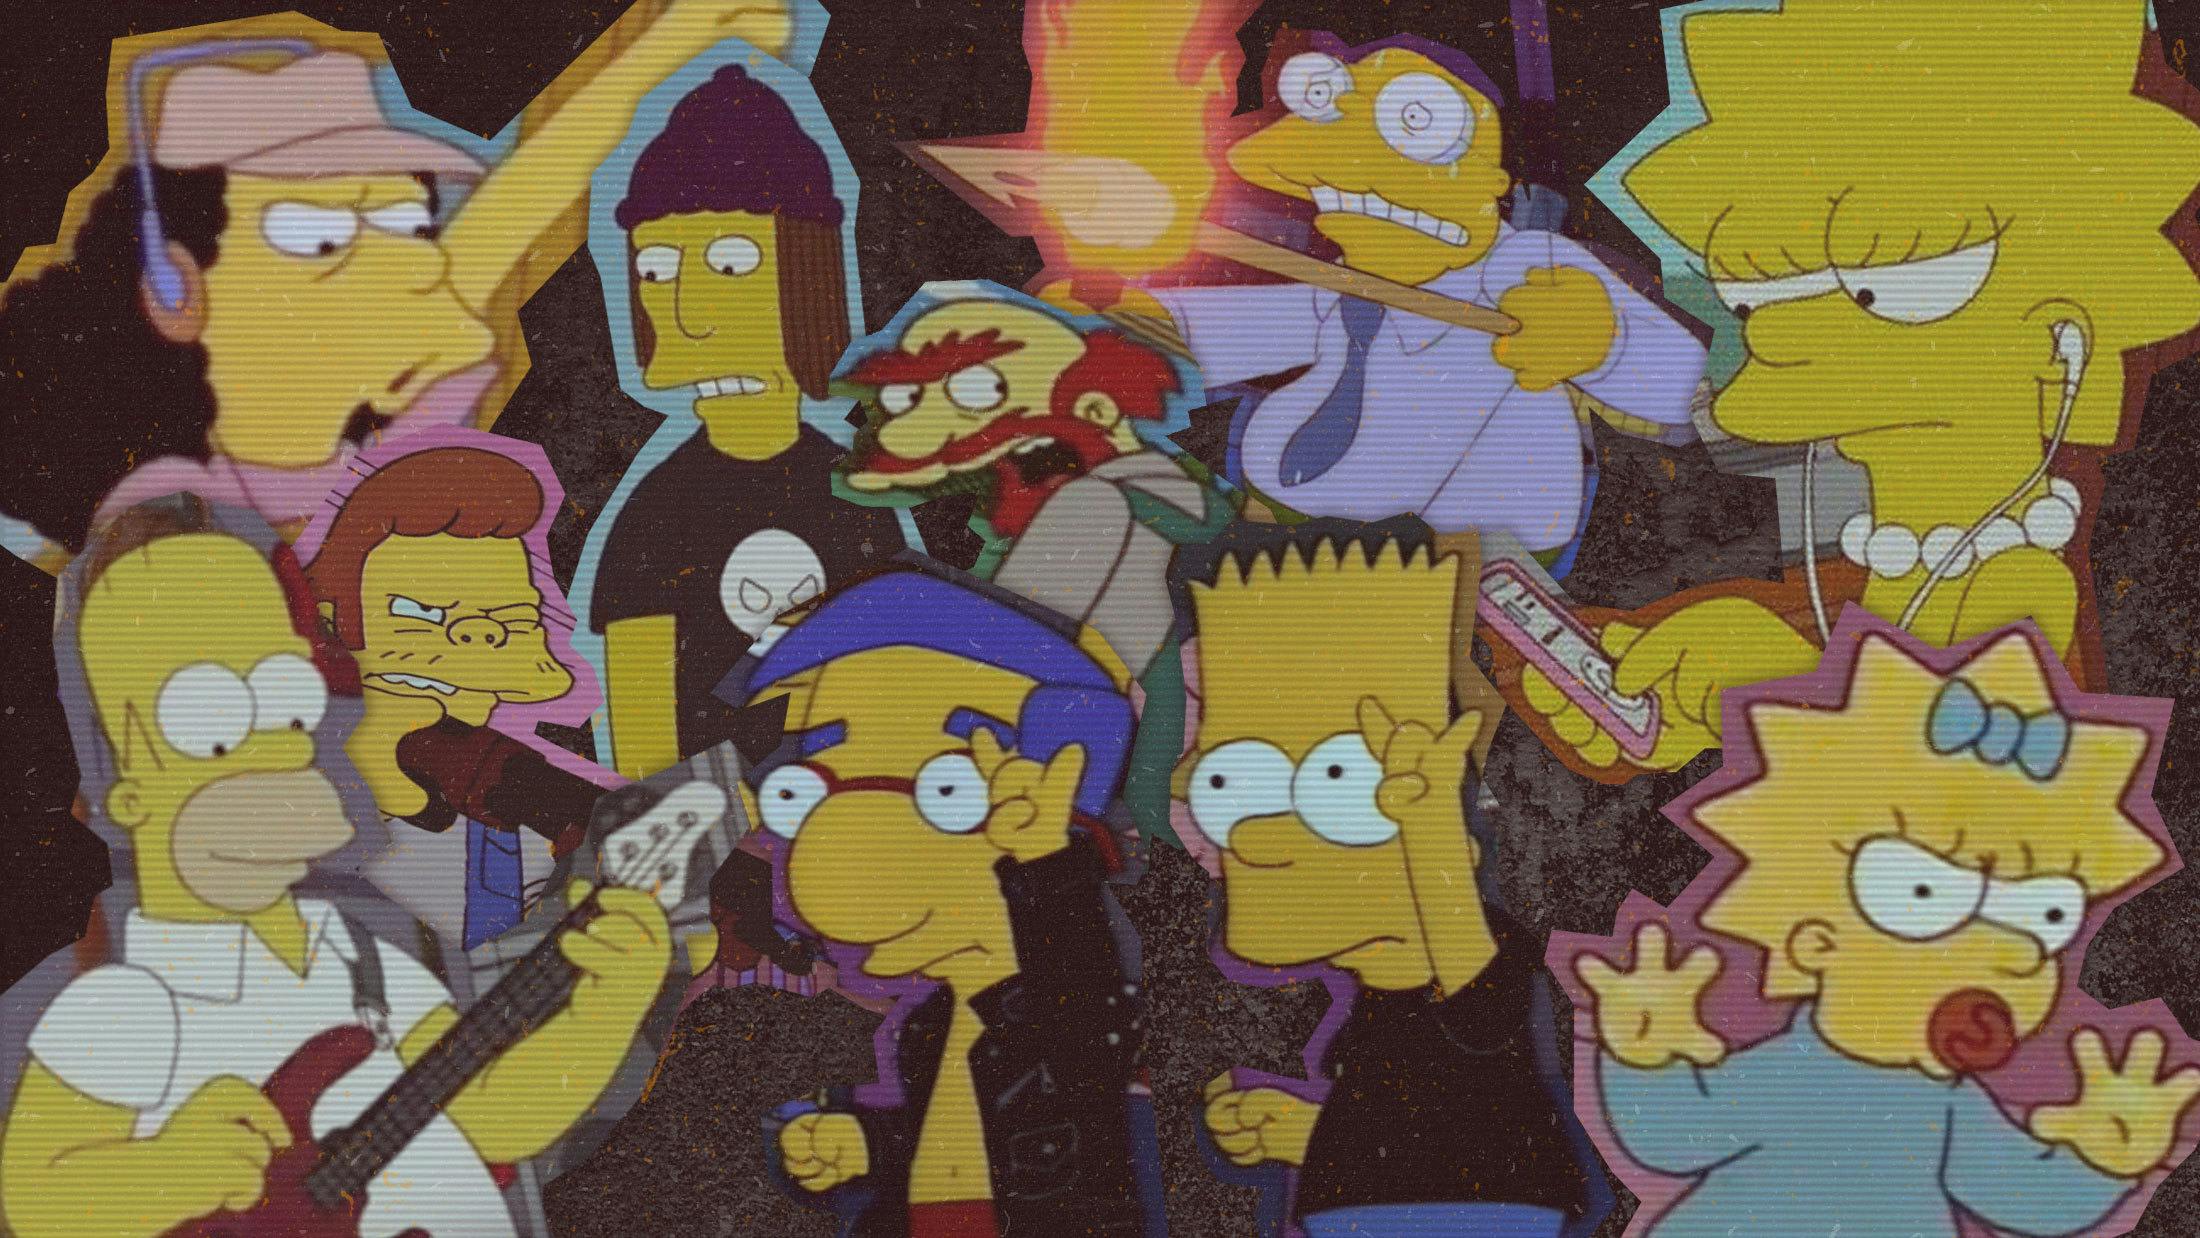 The 50 most metal characters from The Simpsons